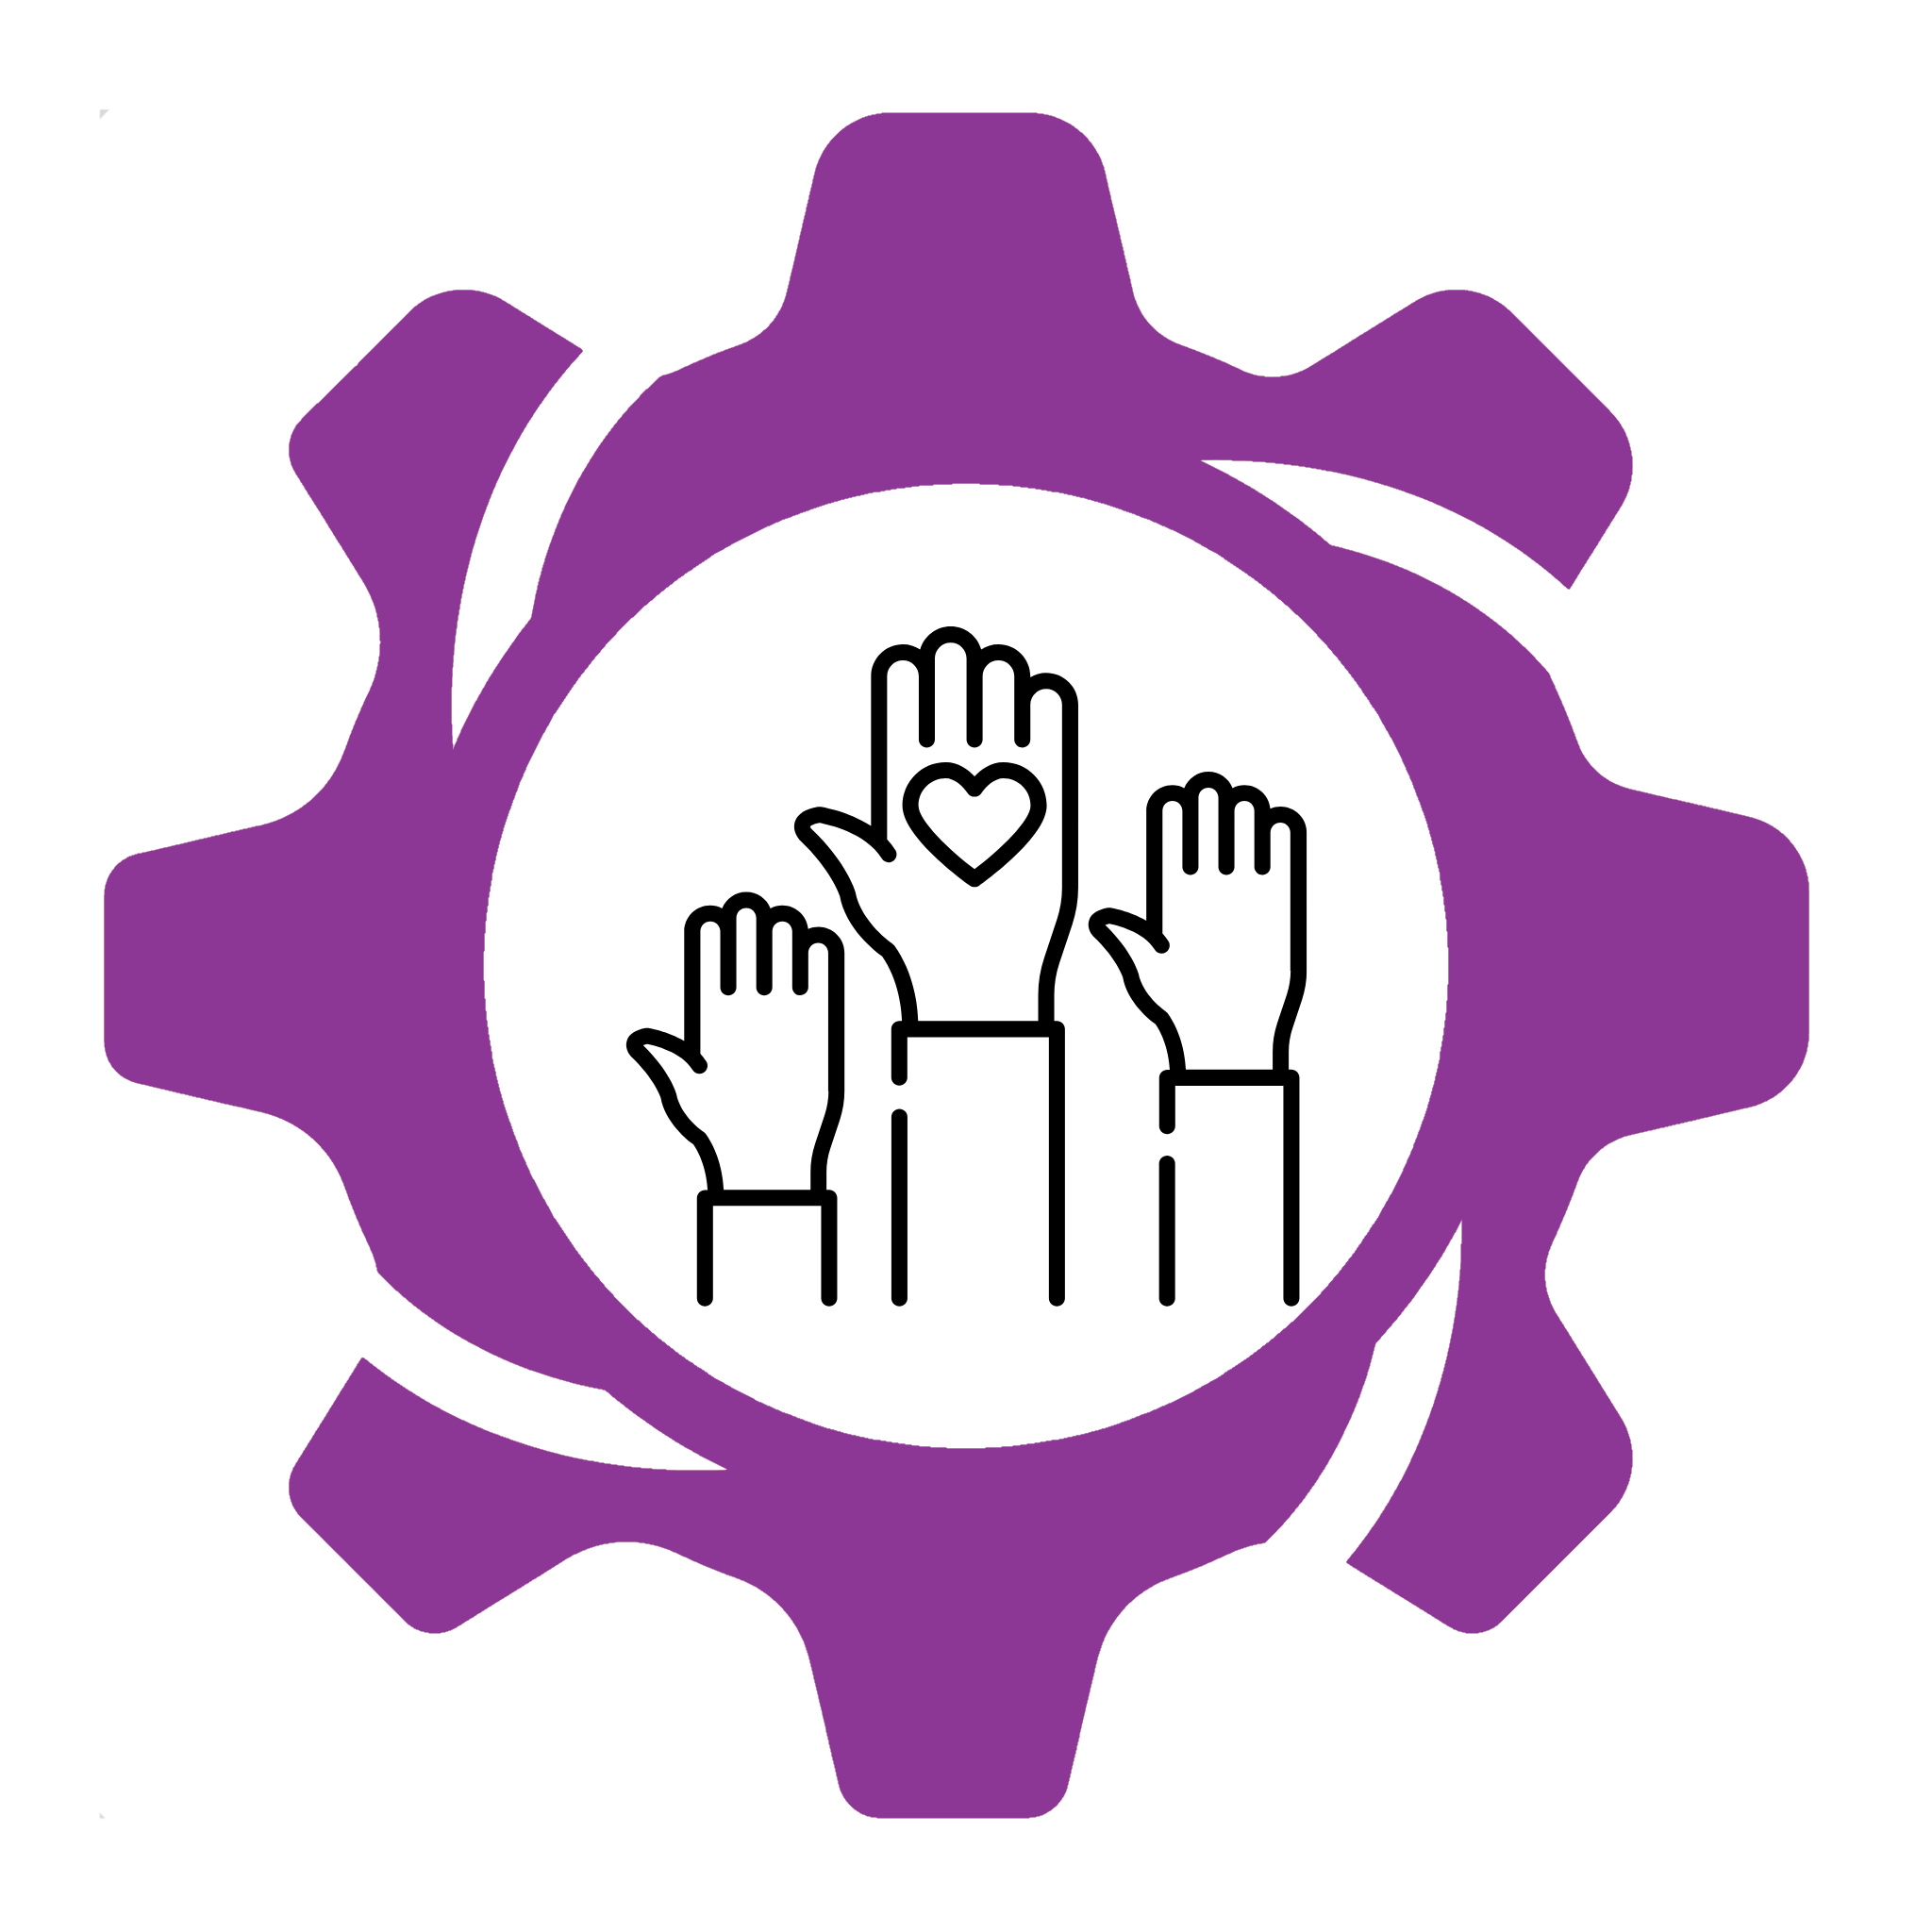 New style cog icon with raised hand volunteering